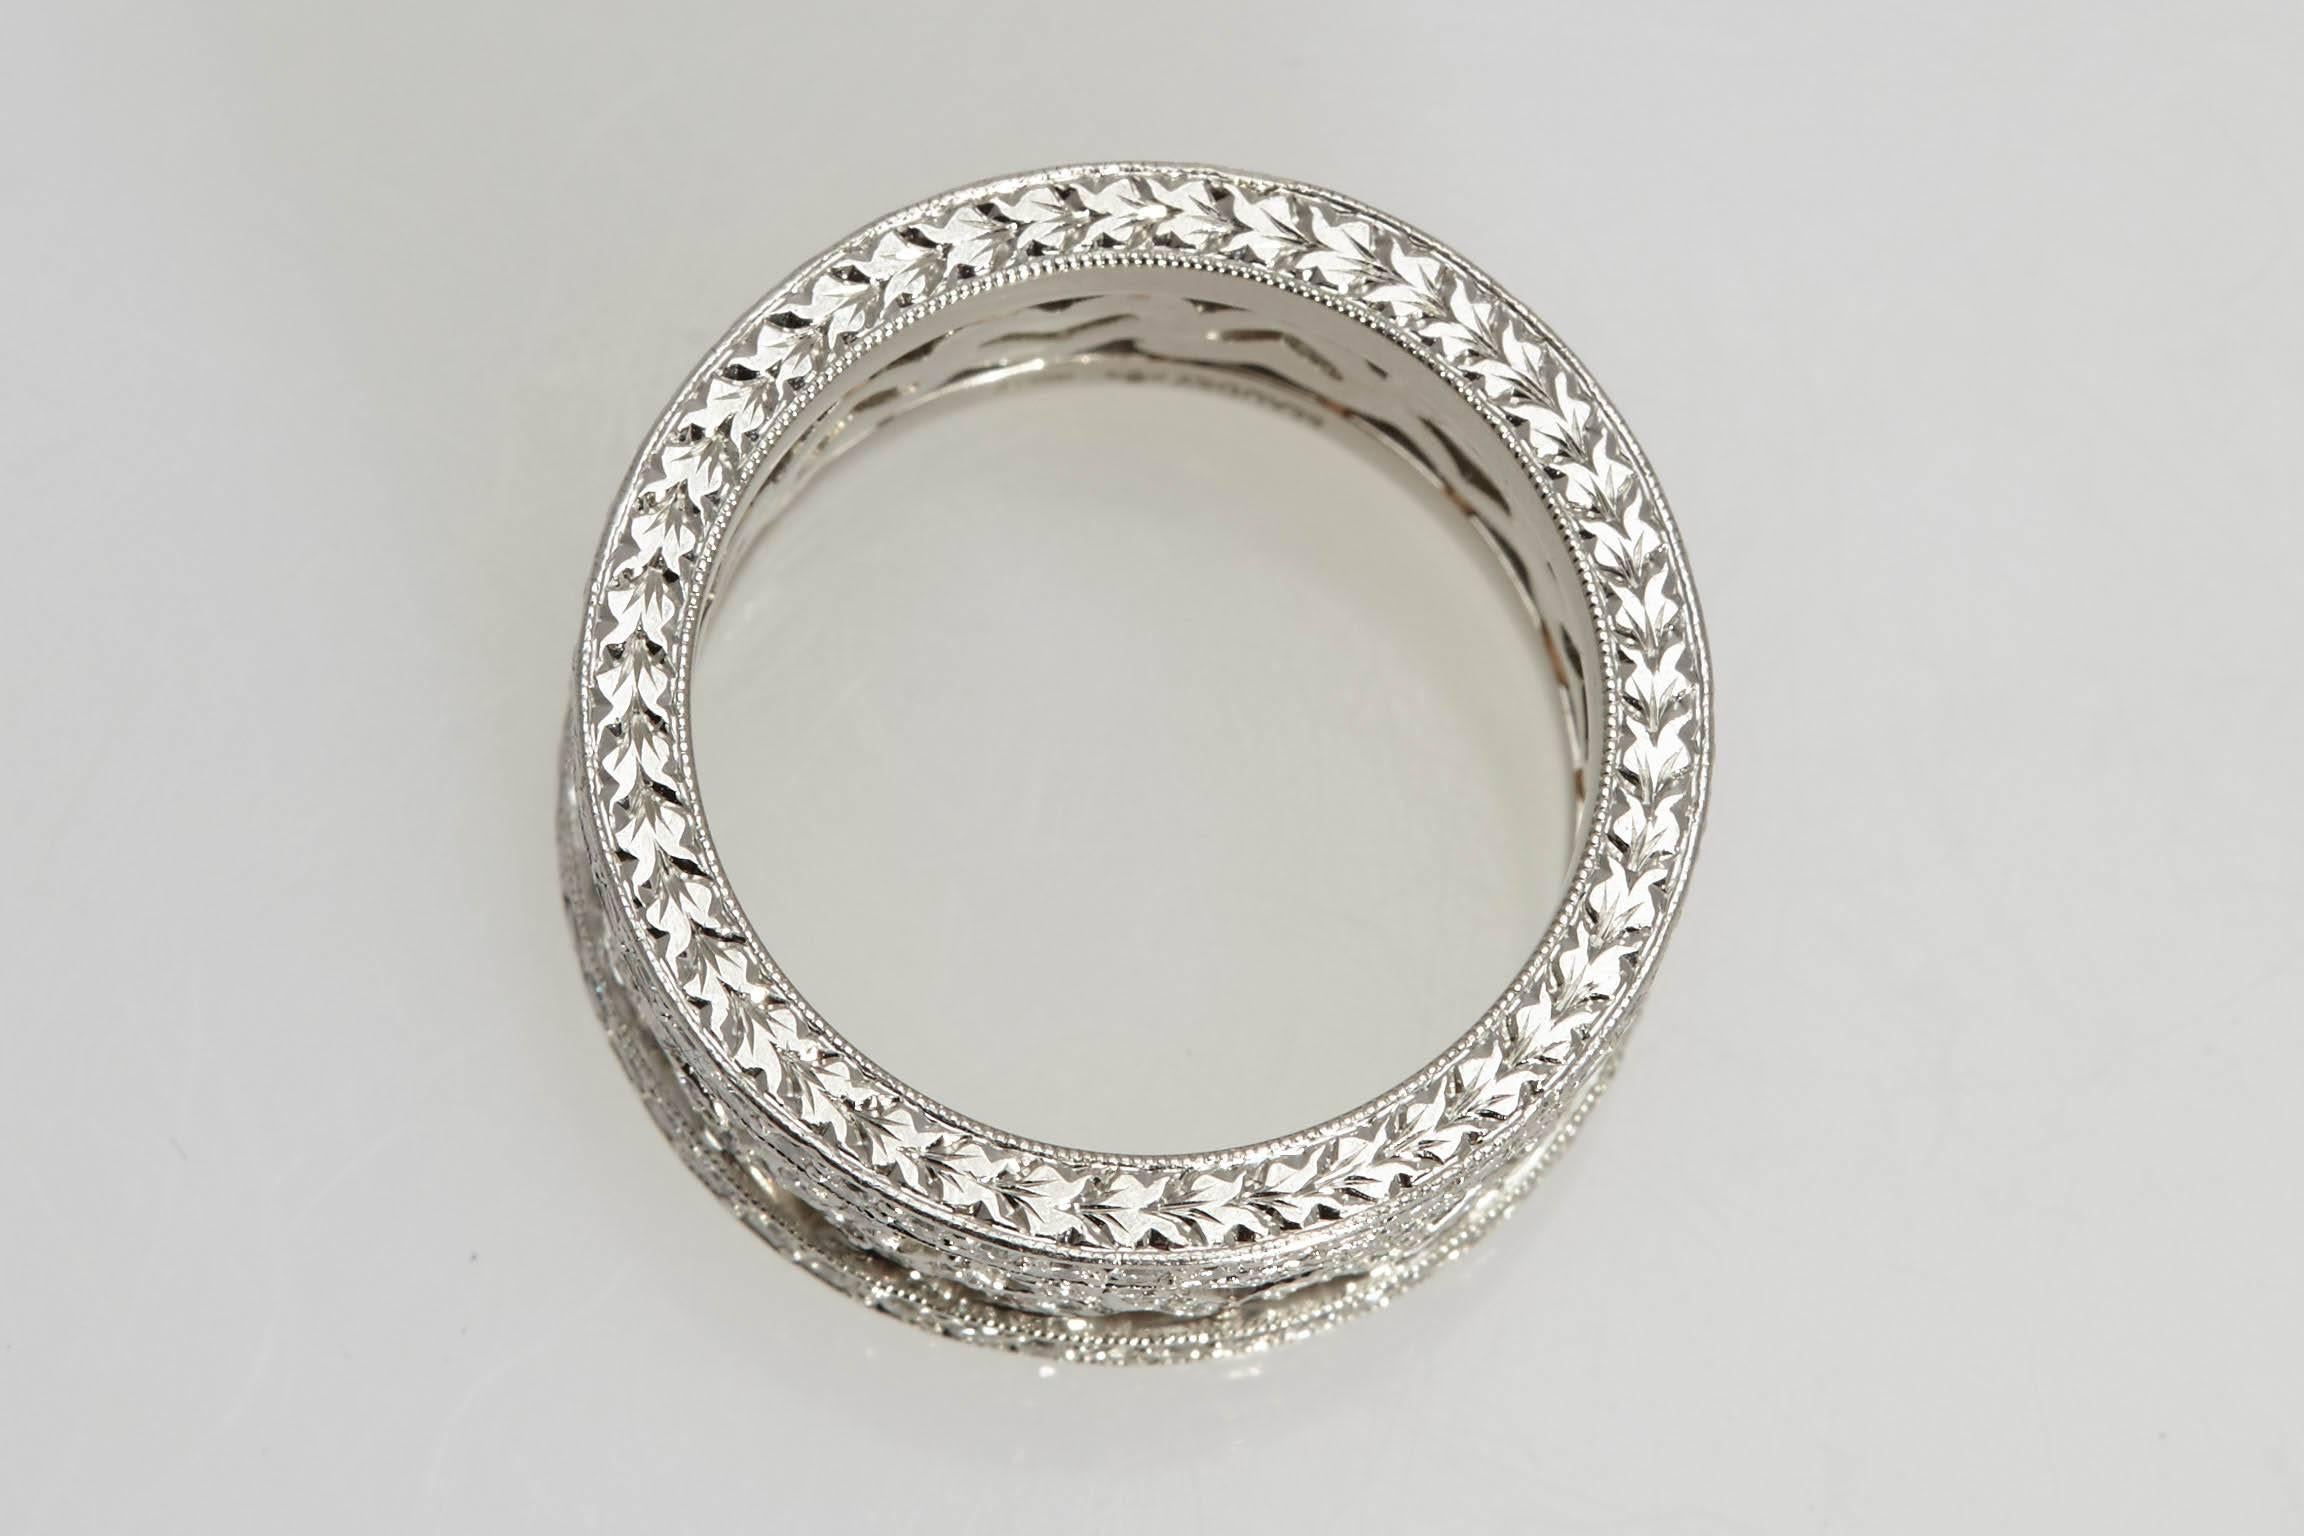 Beautifully designed platinum and diamond eternity ring with diamond hearts in an alternating pattern in the center and a band of diamonds on the outside of the hearts pattern.  The ring contains approximately 1.20 carats in diamonds. The ring is